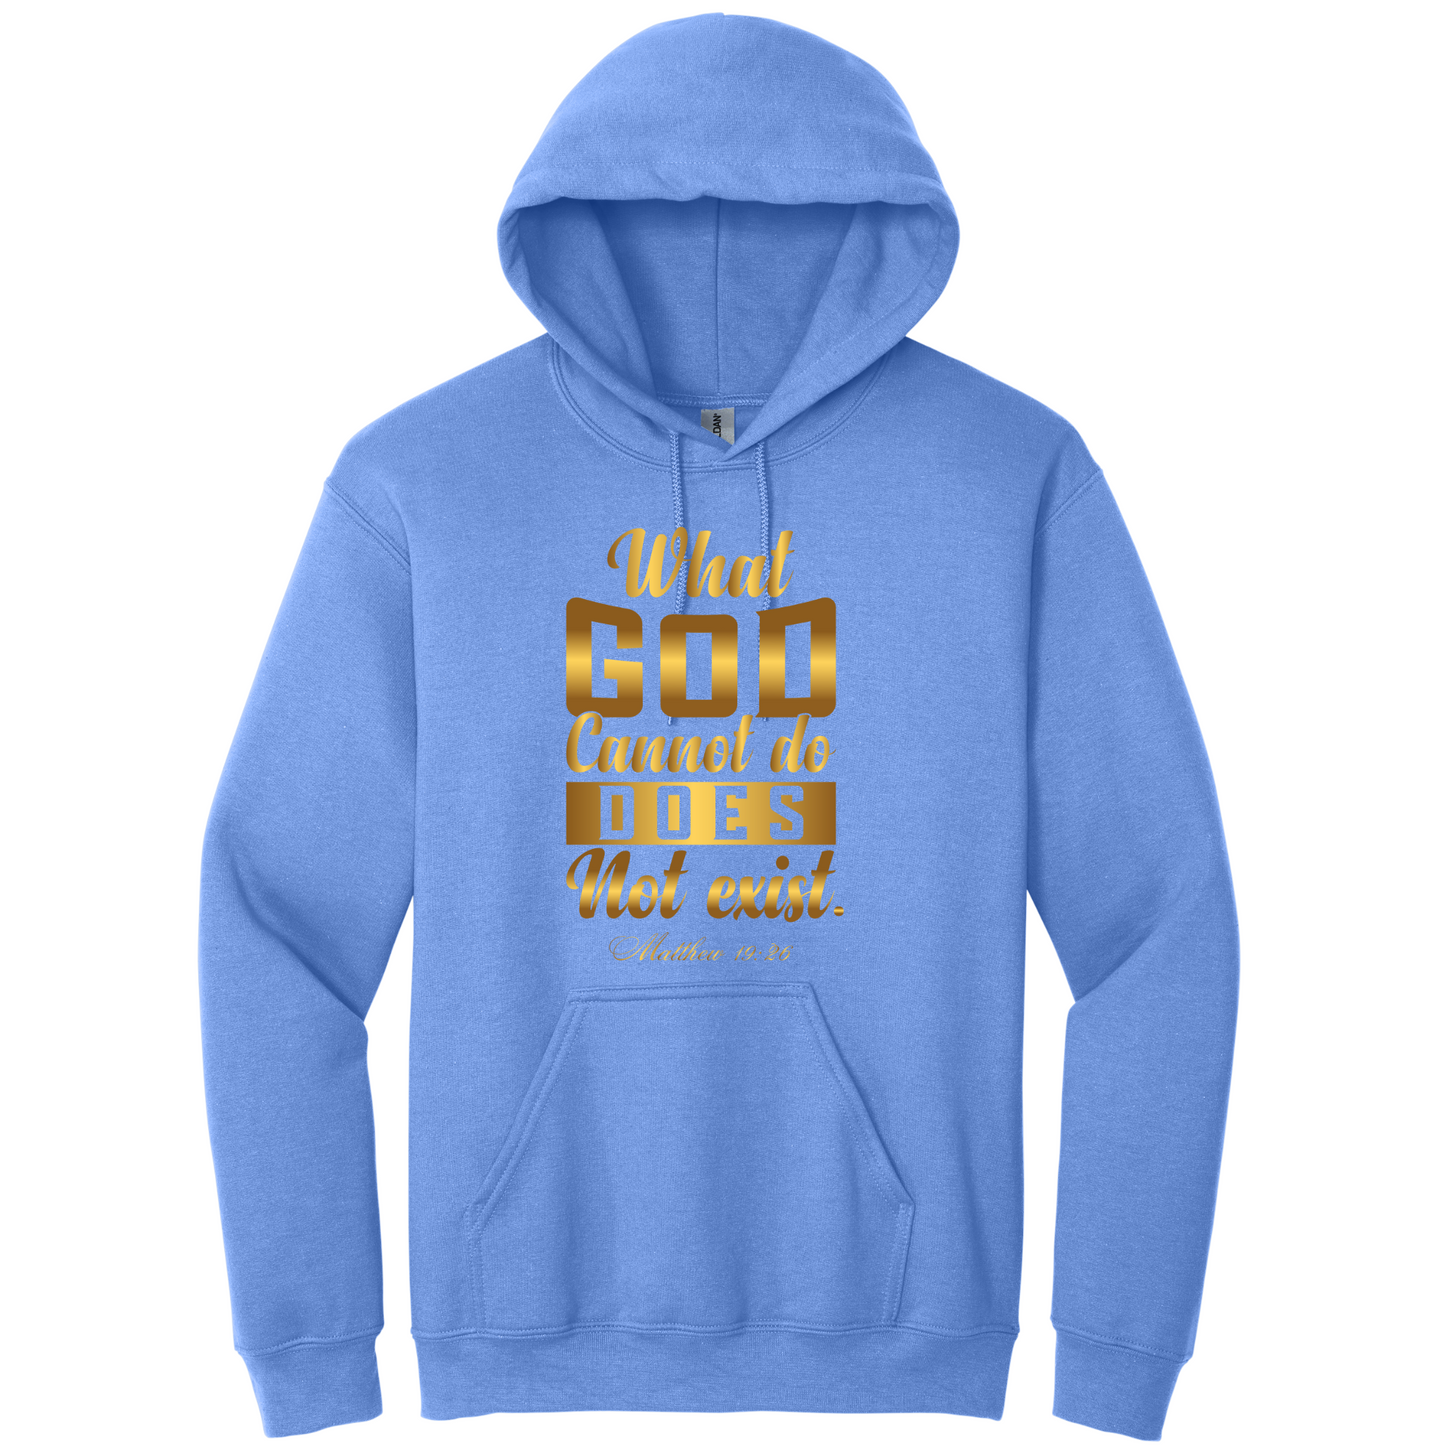 What God Cannot Do Does Not Exist - Hoodies